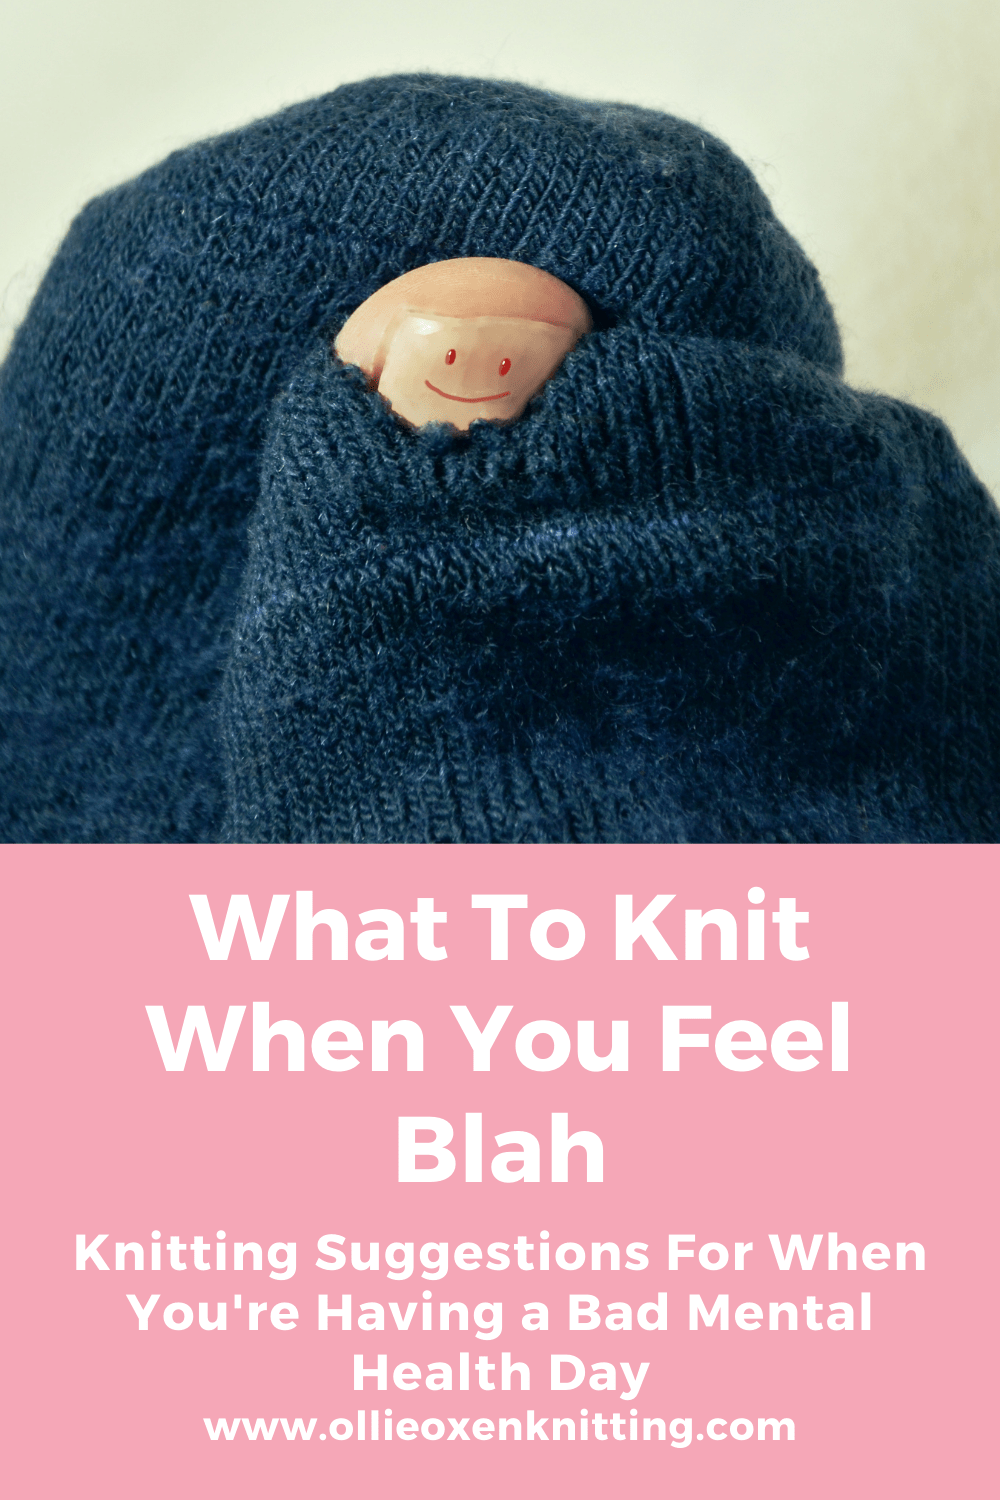 What To Knit When You Feel Blah: Knitting Suggestions For When You're Having a Bad Mental Health Day | Ollie Oxen Knitting